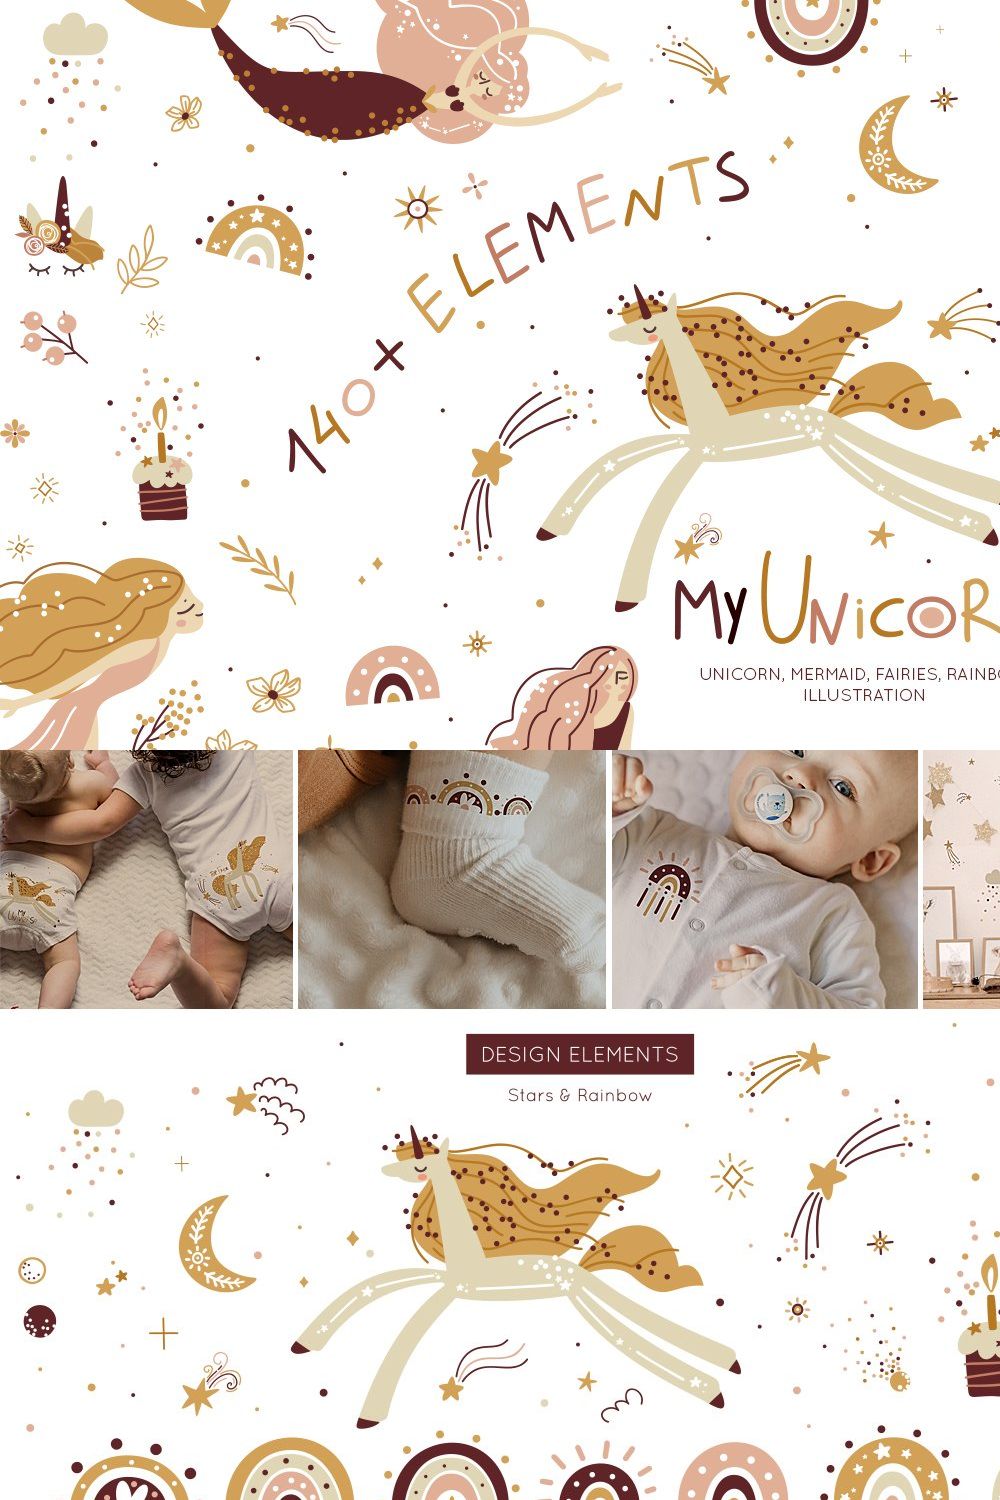 Unicorn, Mermaid, Fairy collection pinterest preview image.